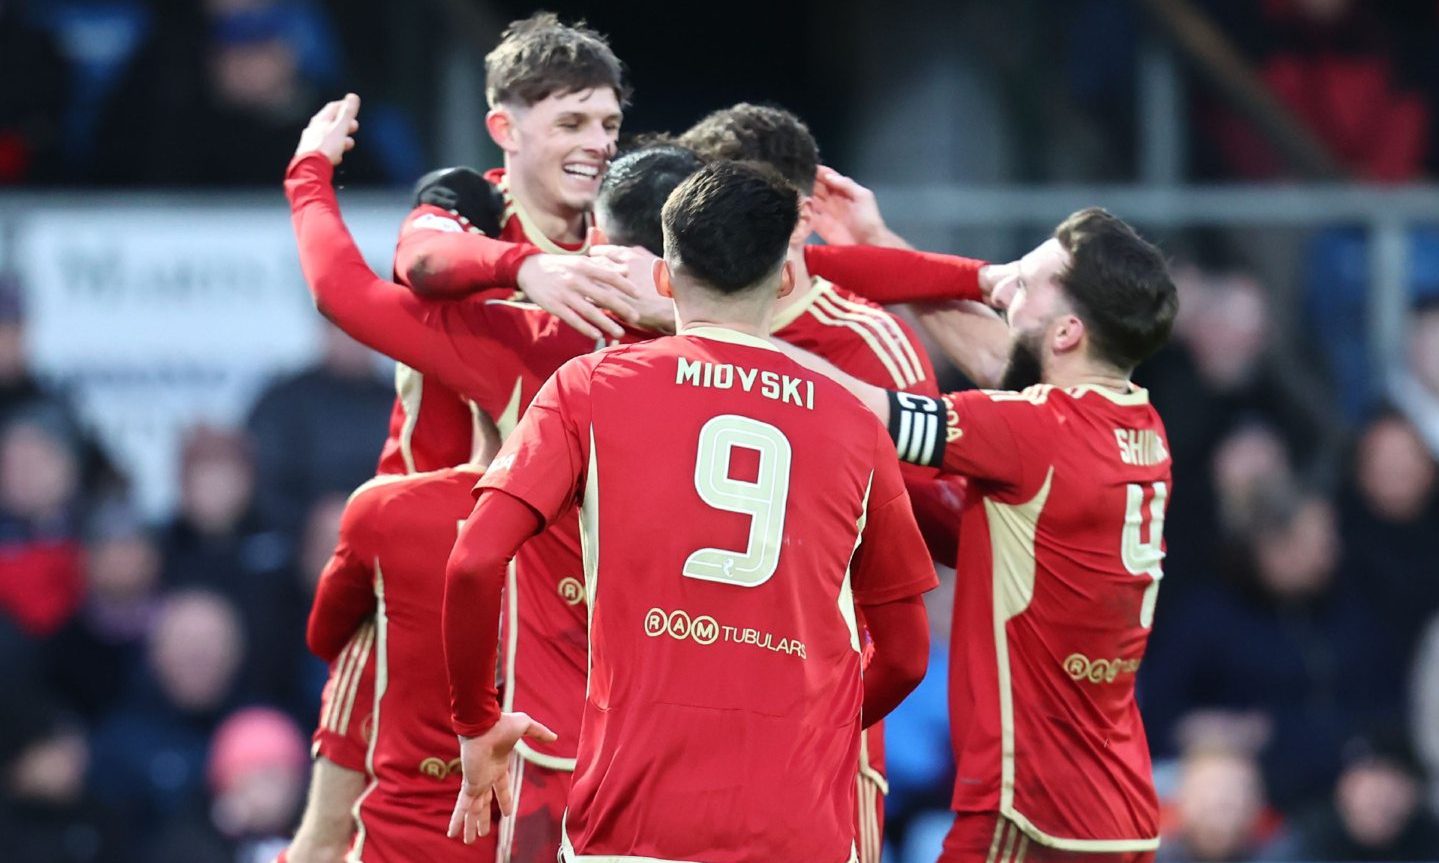 Jamie McGrath (7) of Aberdeen celebrates scoring his second goal against Ross County. Image: Shutterstock